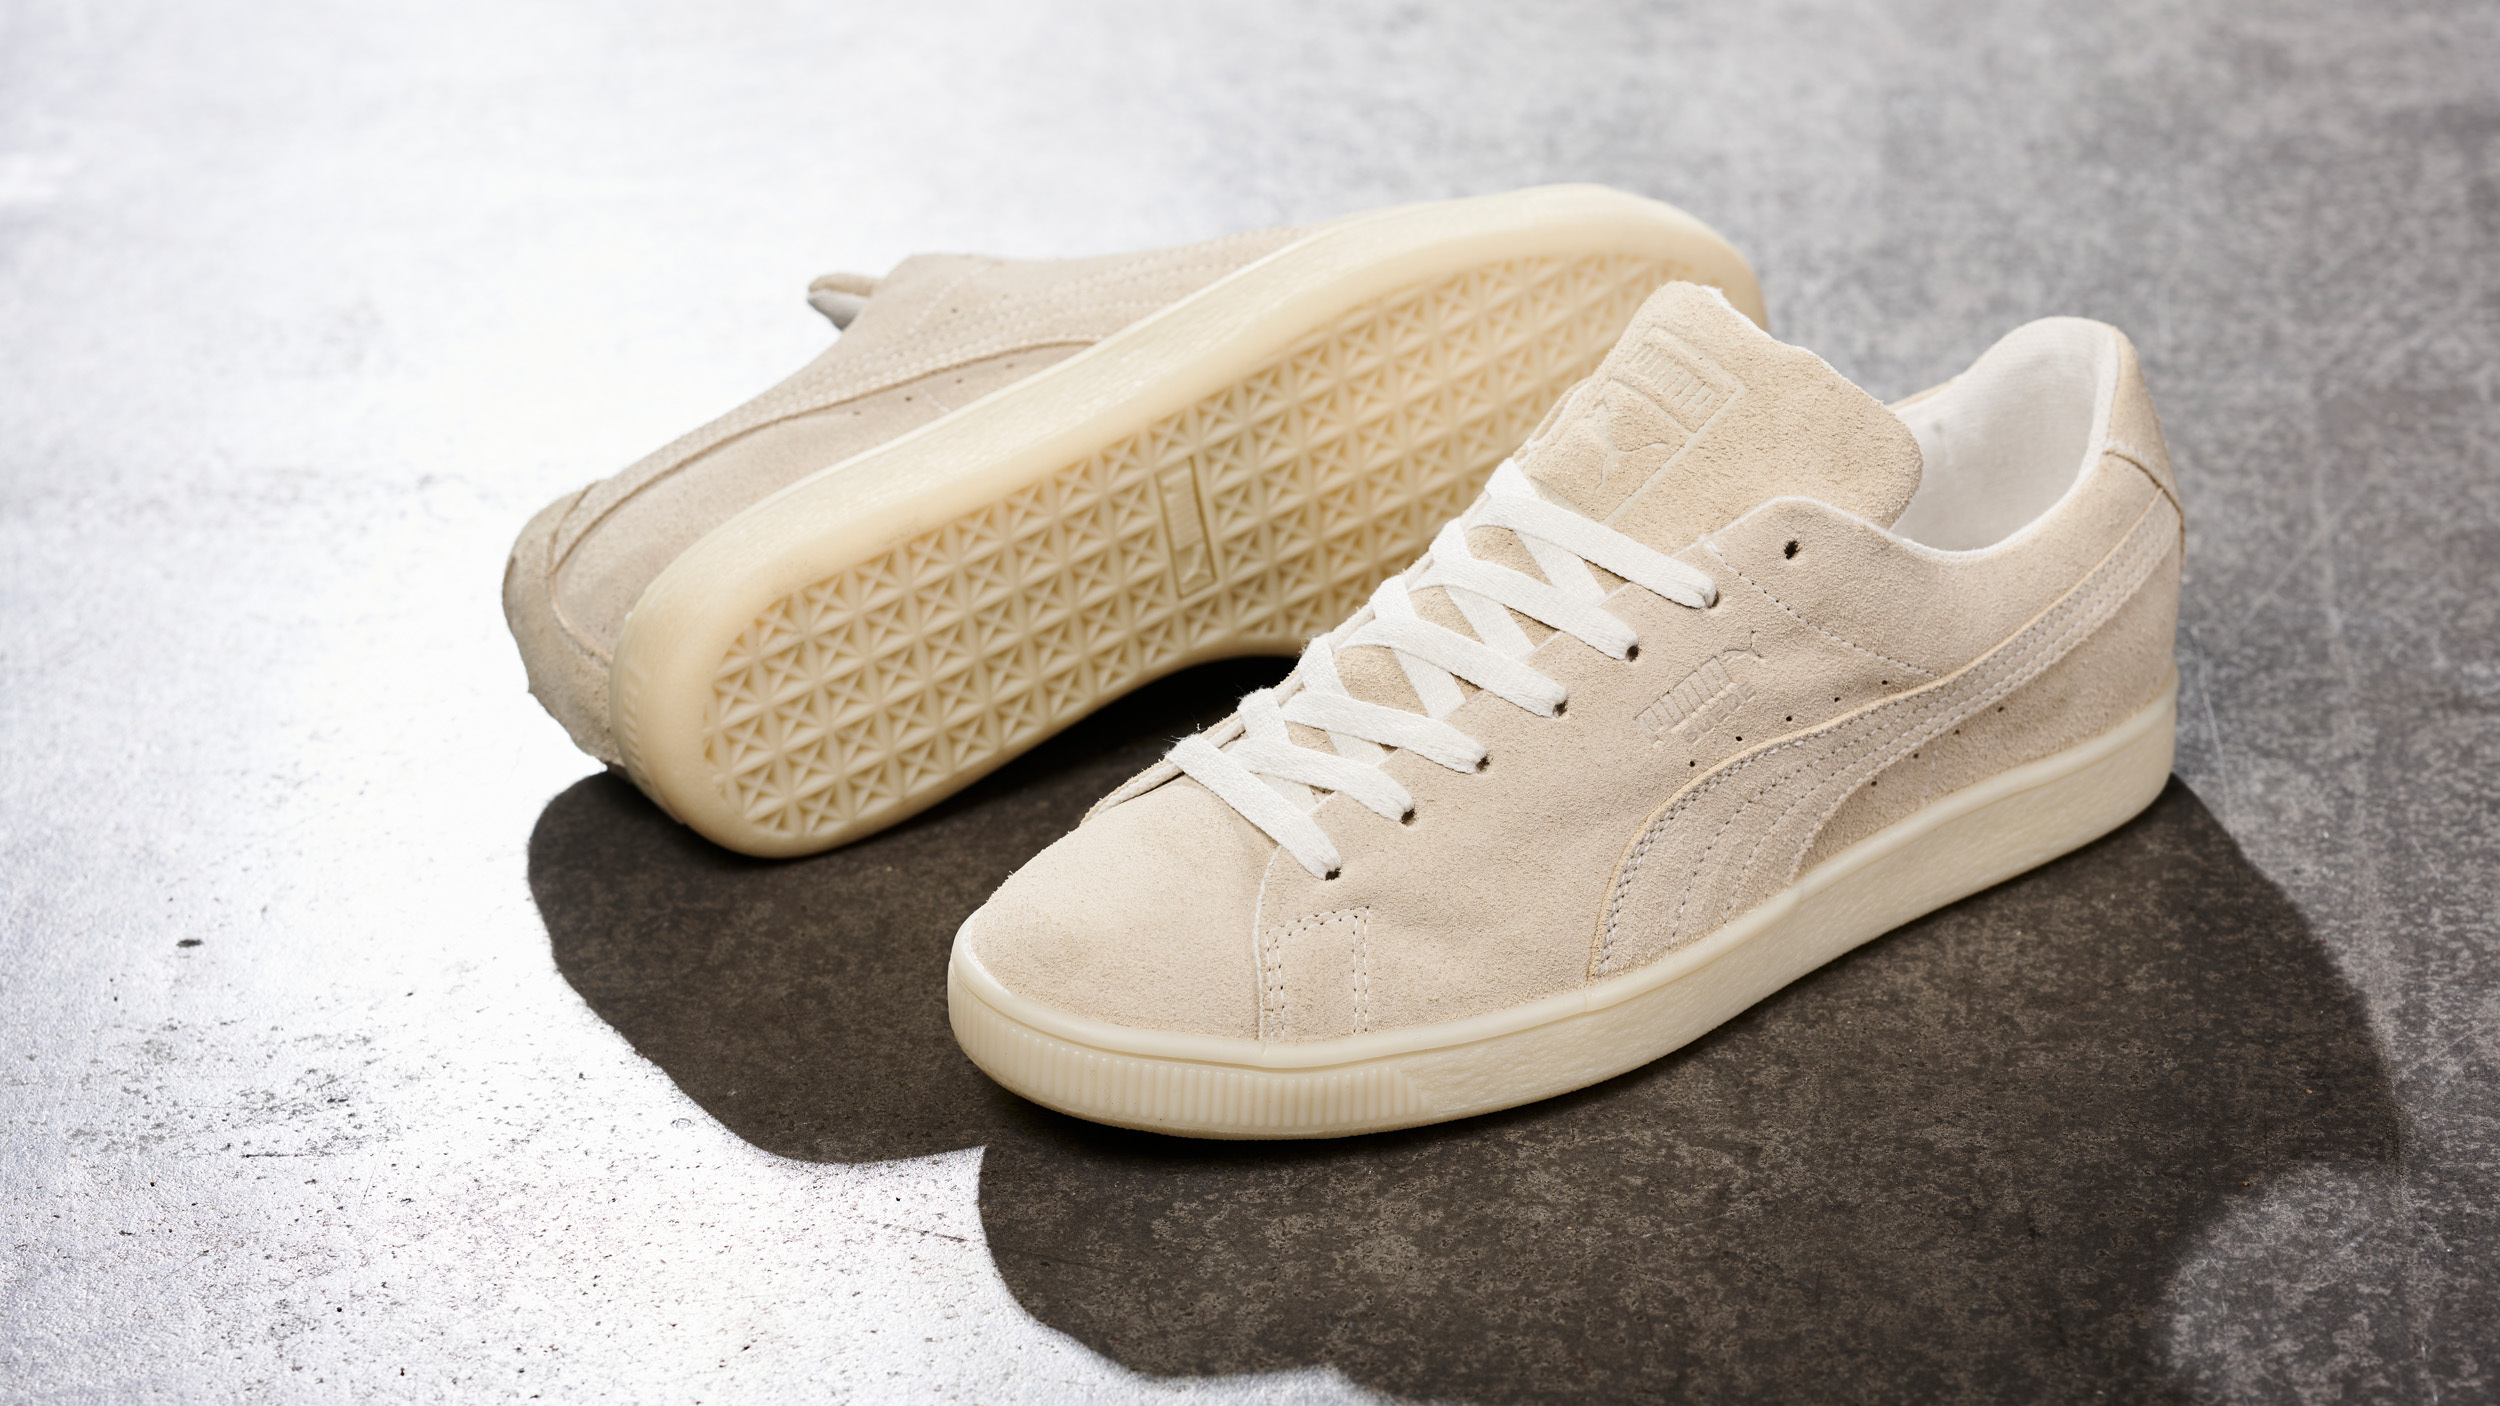 raket Anekdote sap No Time for Waste: PUMA pilots testing for biodegradable RE:SUEDE version  of its most iconic sneaker | Business Wire